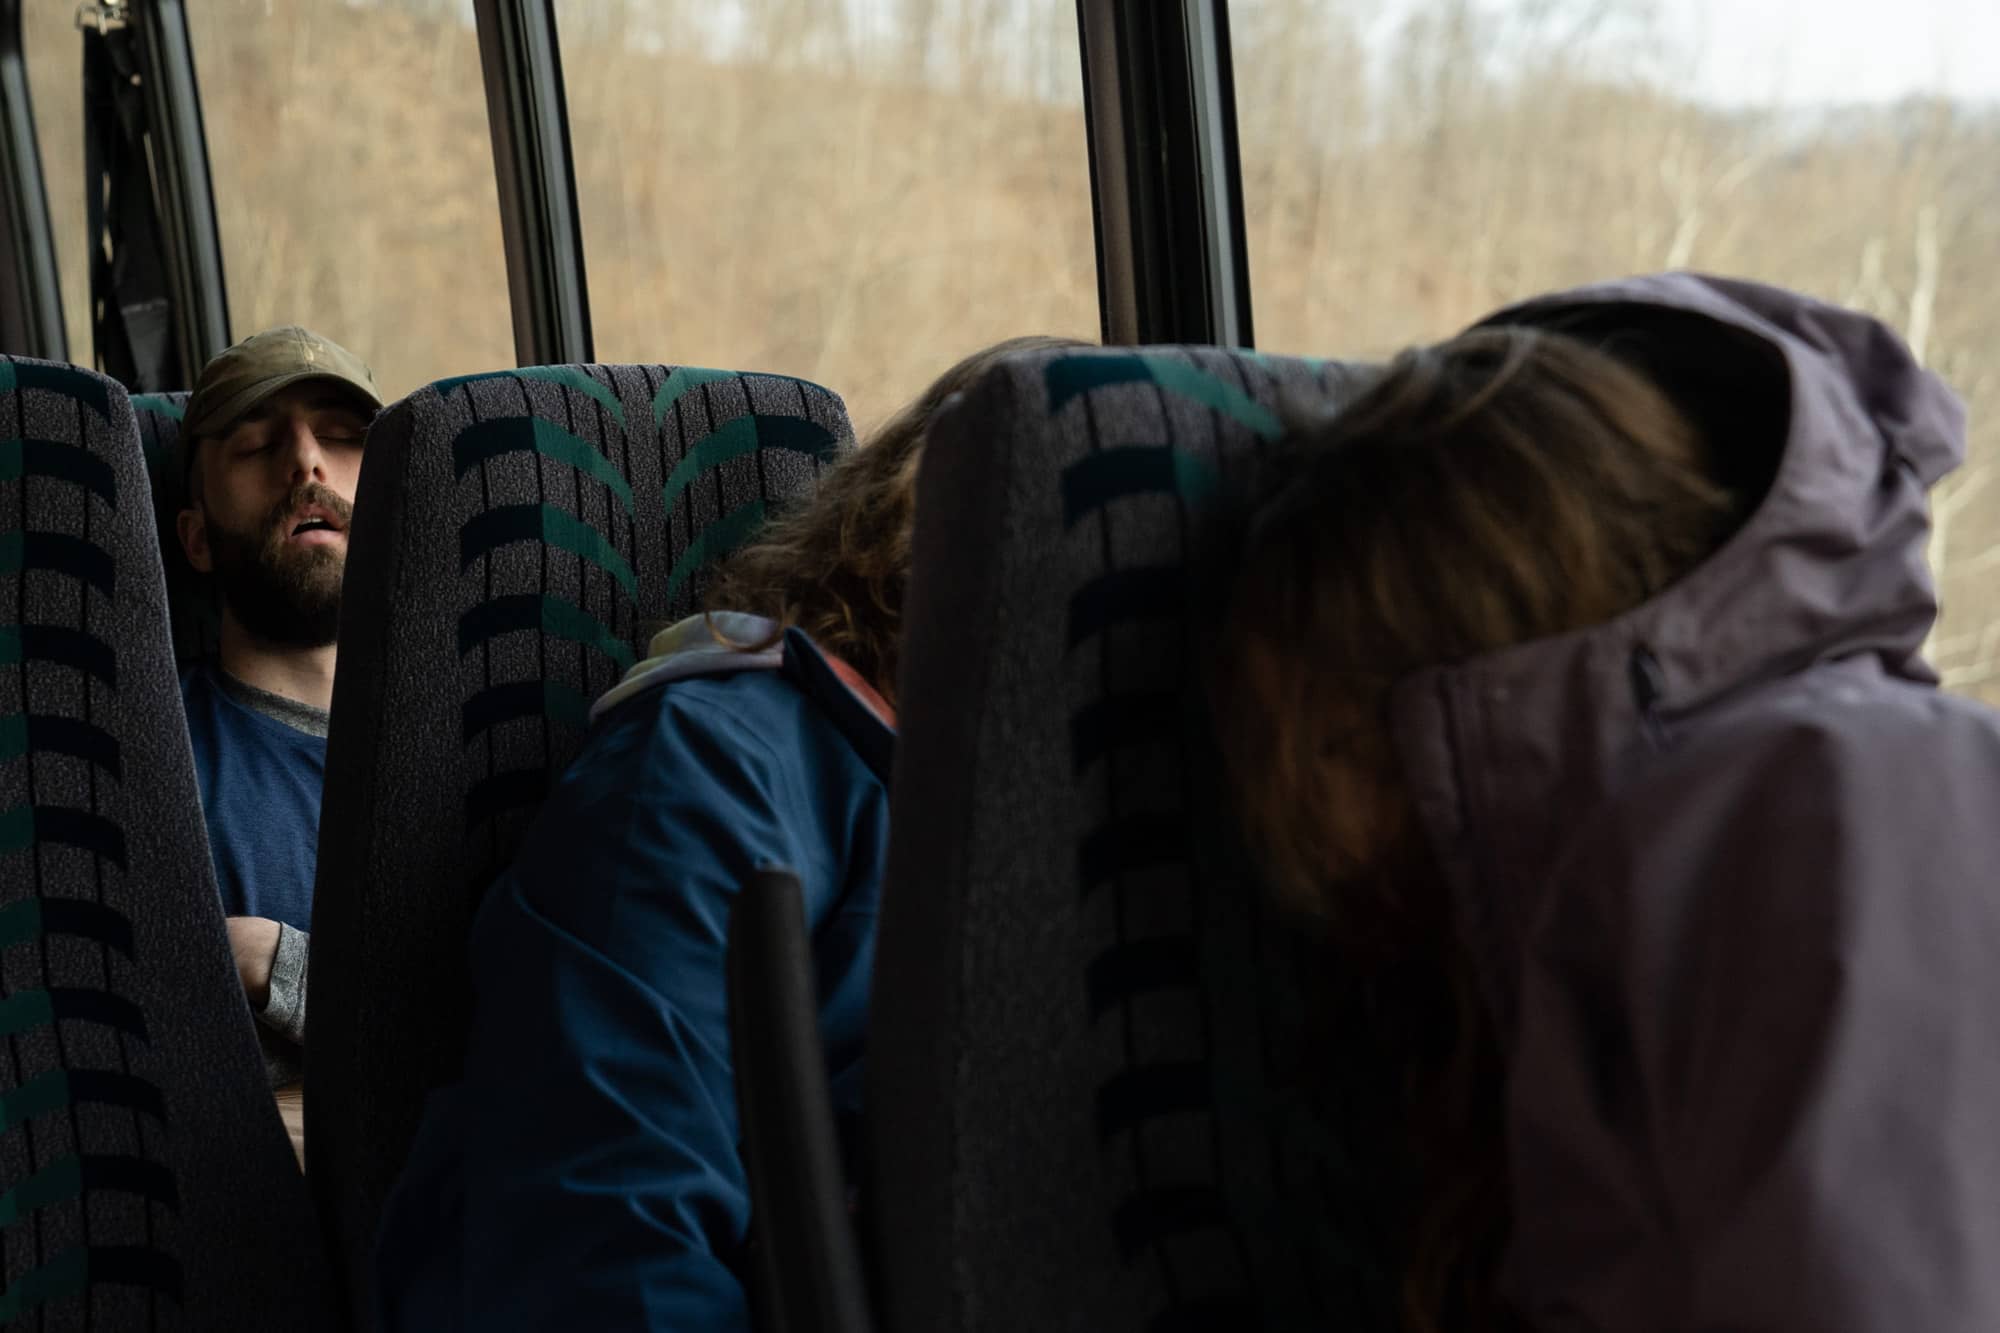 Eamonn Bell, Helena Karlstrom and Melanie Ahmetspahic sleep on the bus on the way to backpack a section of the Appalachian Trail in the Nantahala National Forest on Saturday, March 5, 2022, in North Carolina.